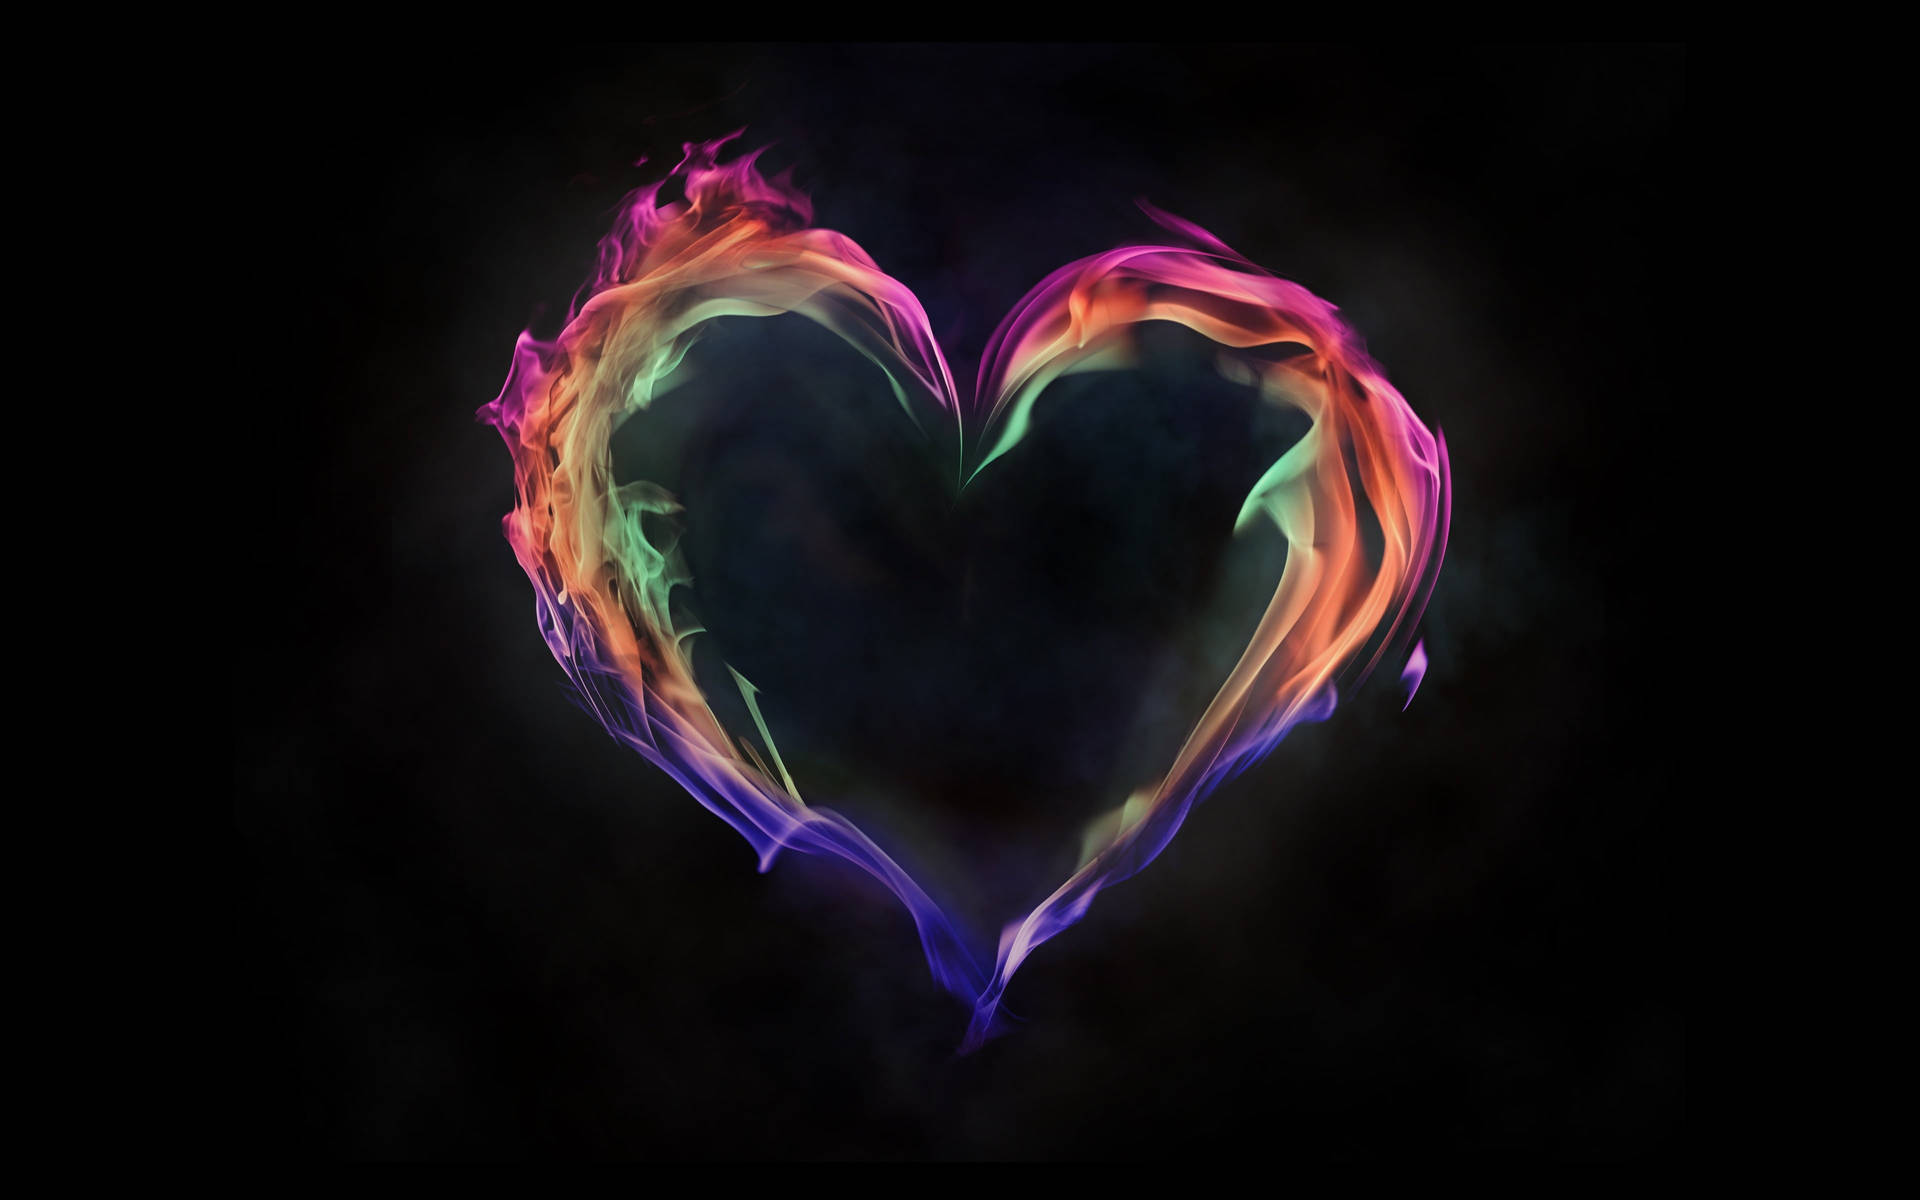 Creative Colorful Flaming Heart Picture